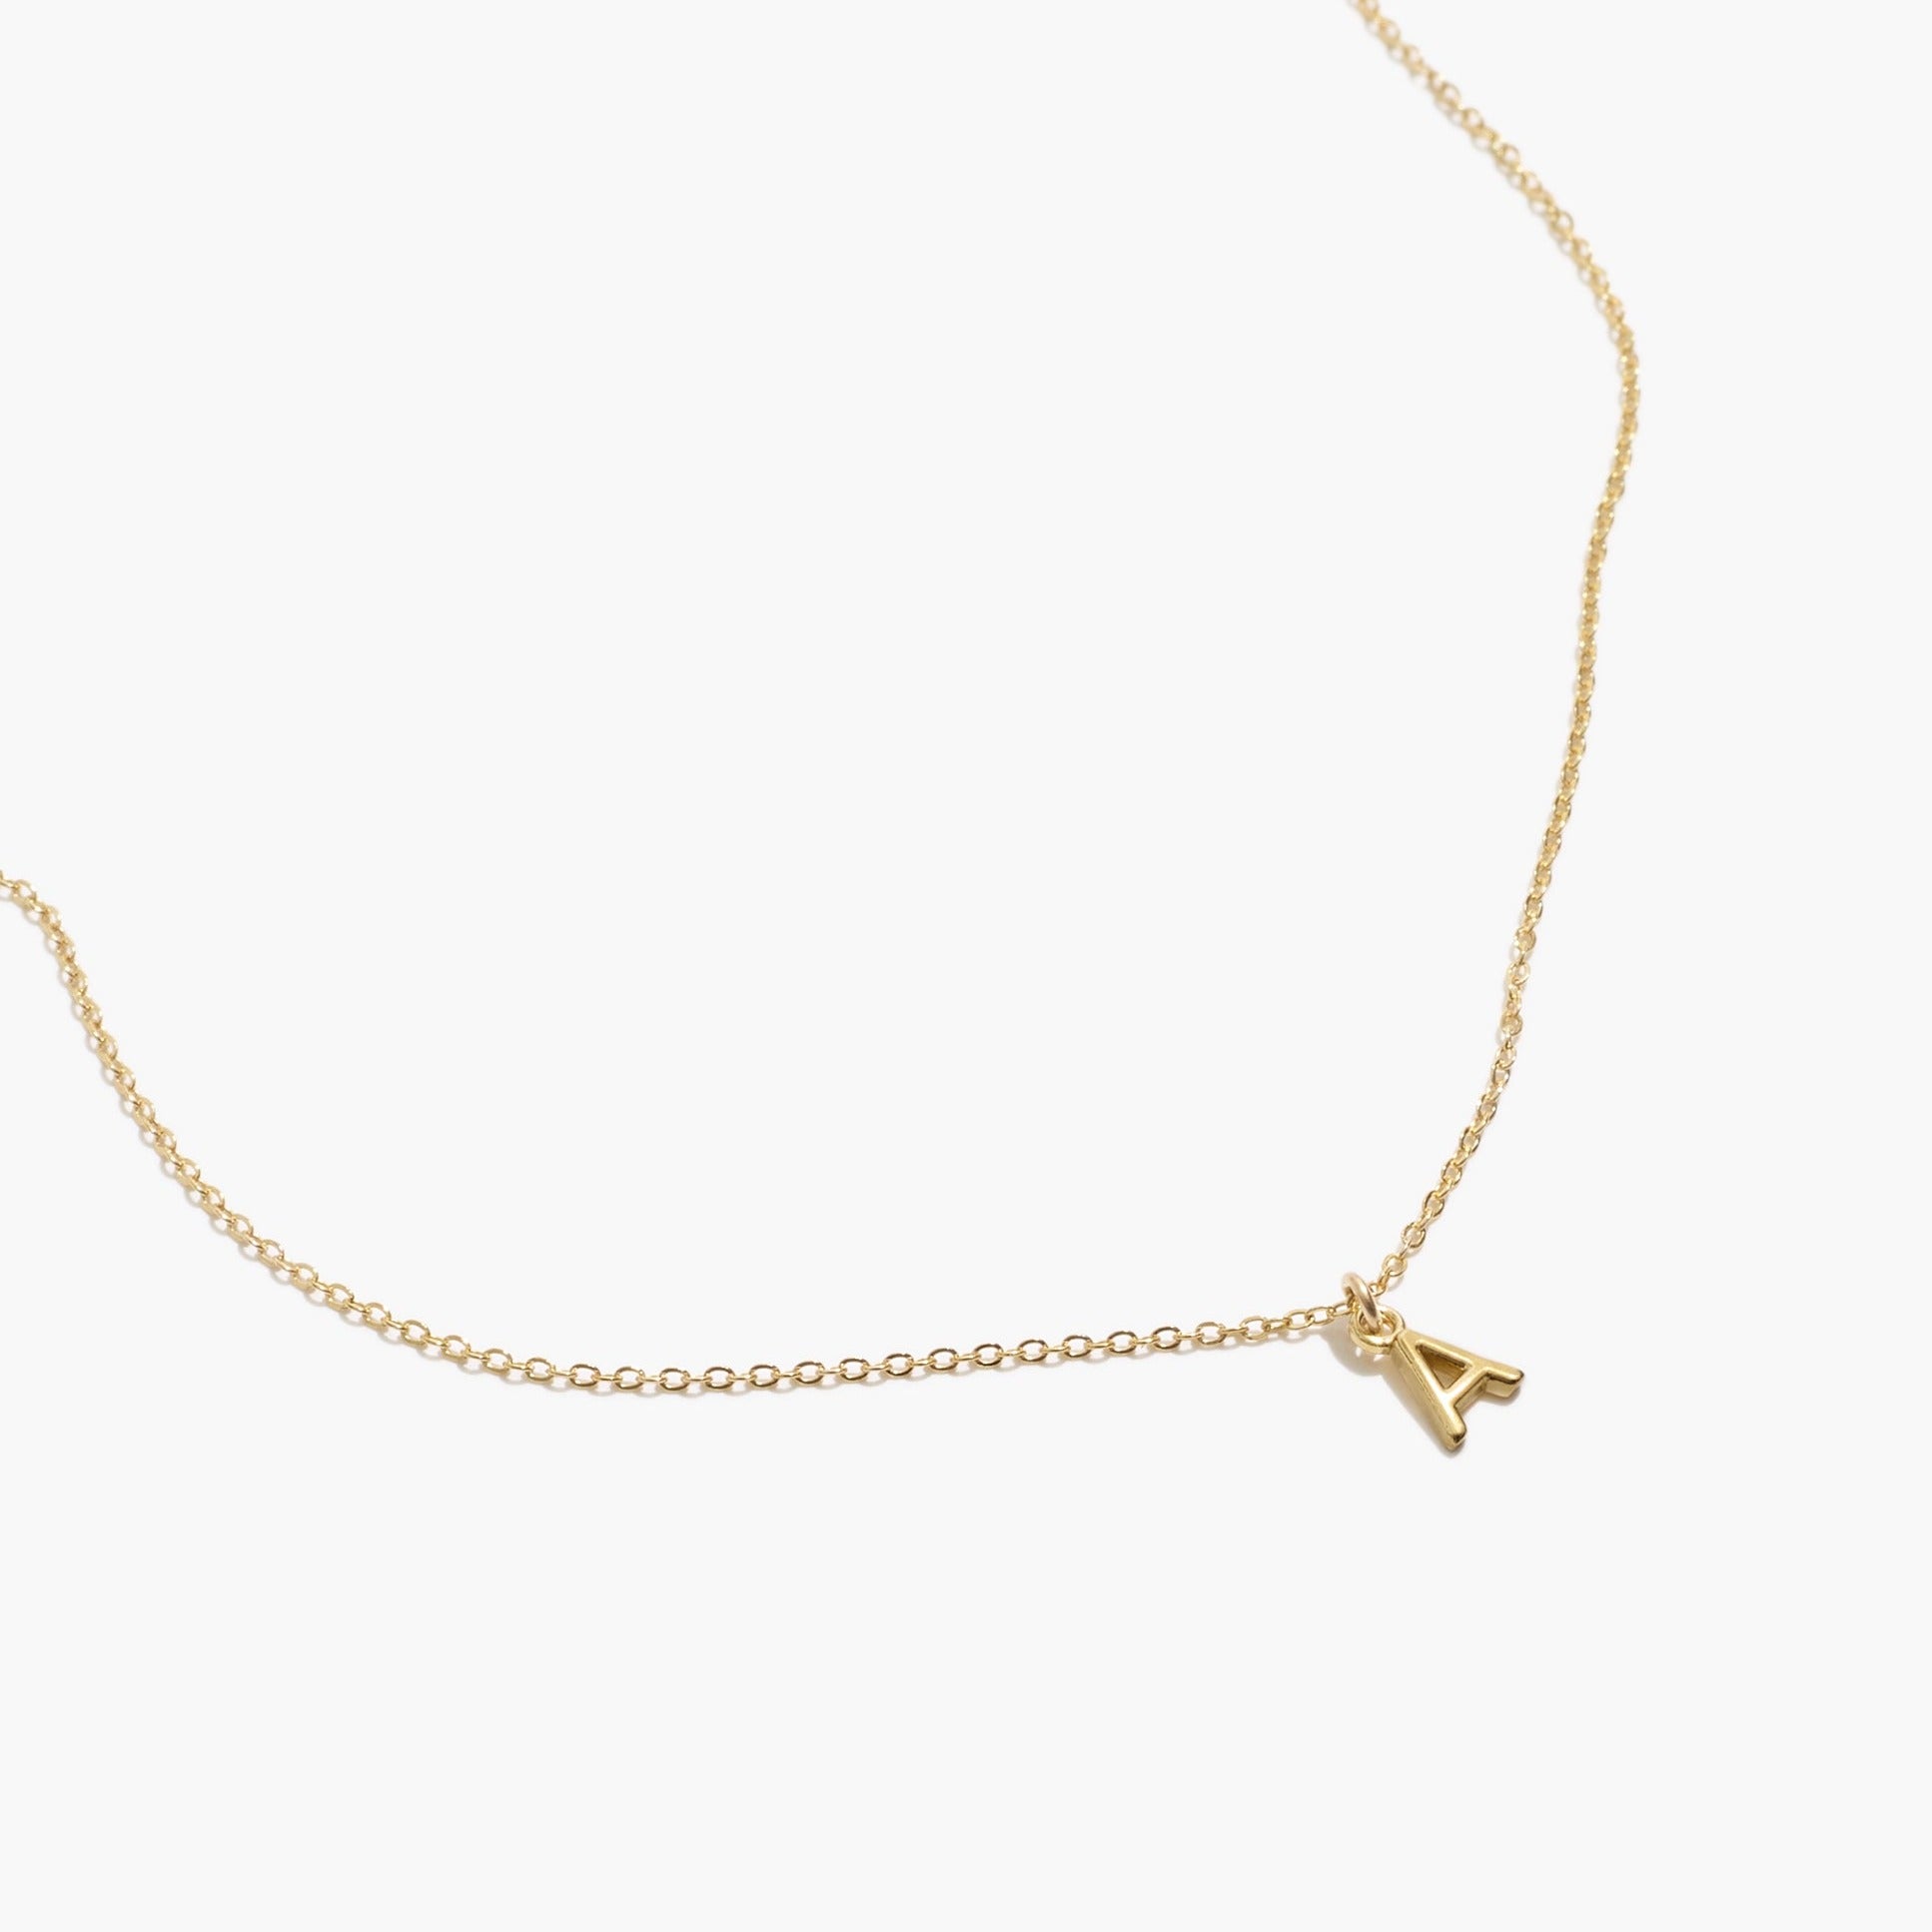 Delicate Initial Necklace, the perfect personalized piece. Minimal layering jewelry handmade in America by Katie Dean Jewelry.